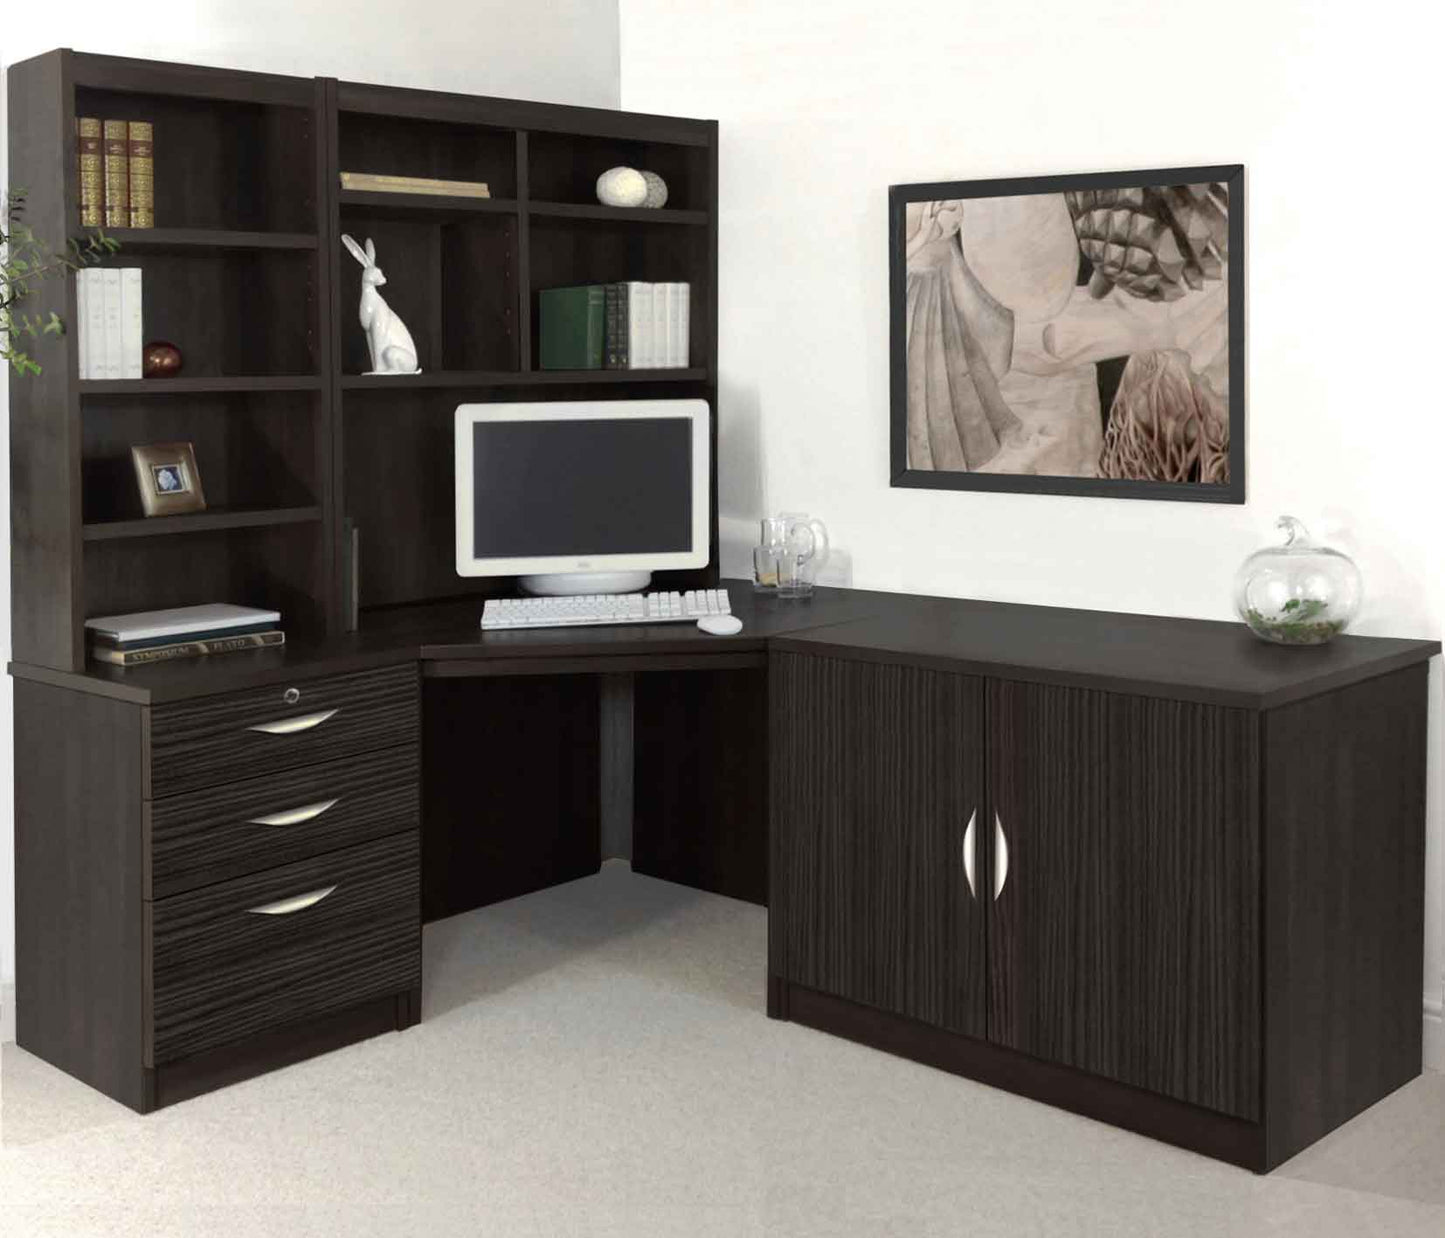 R White Cabinets Set Home Office Set Up